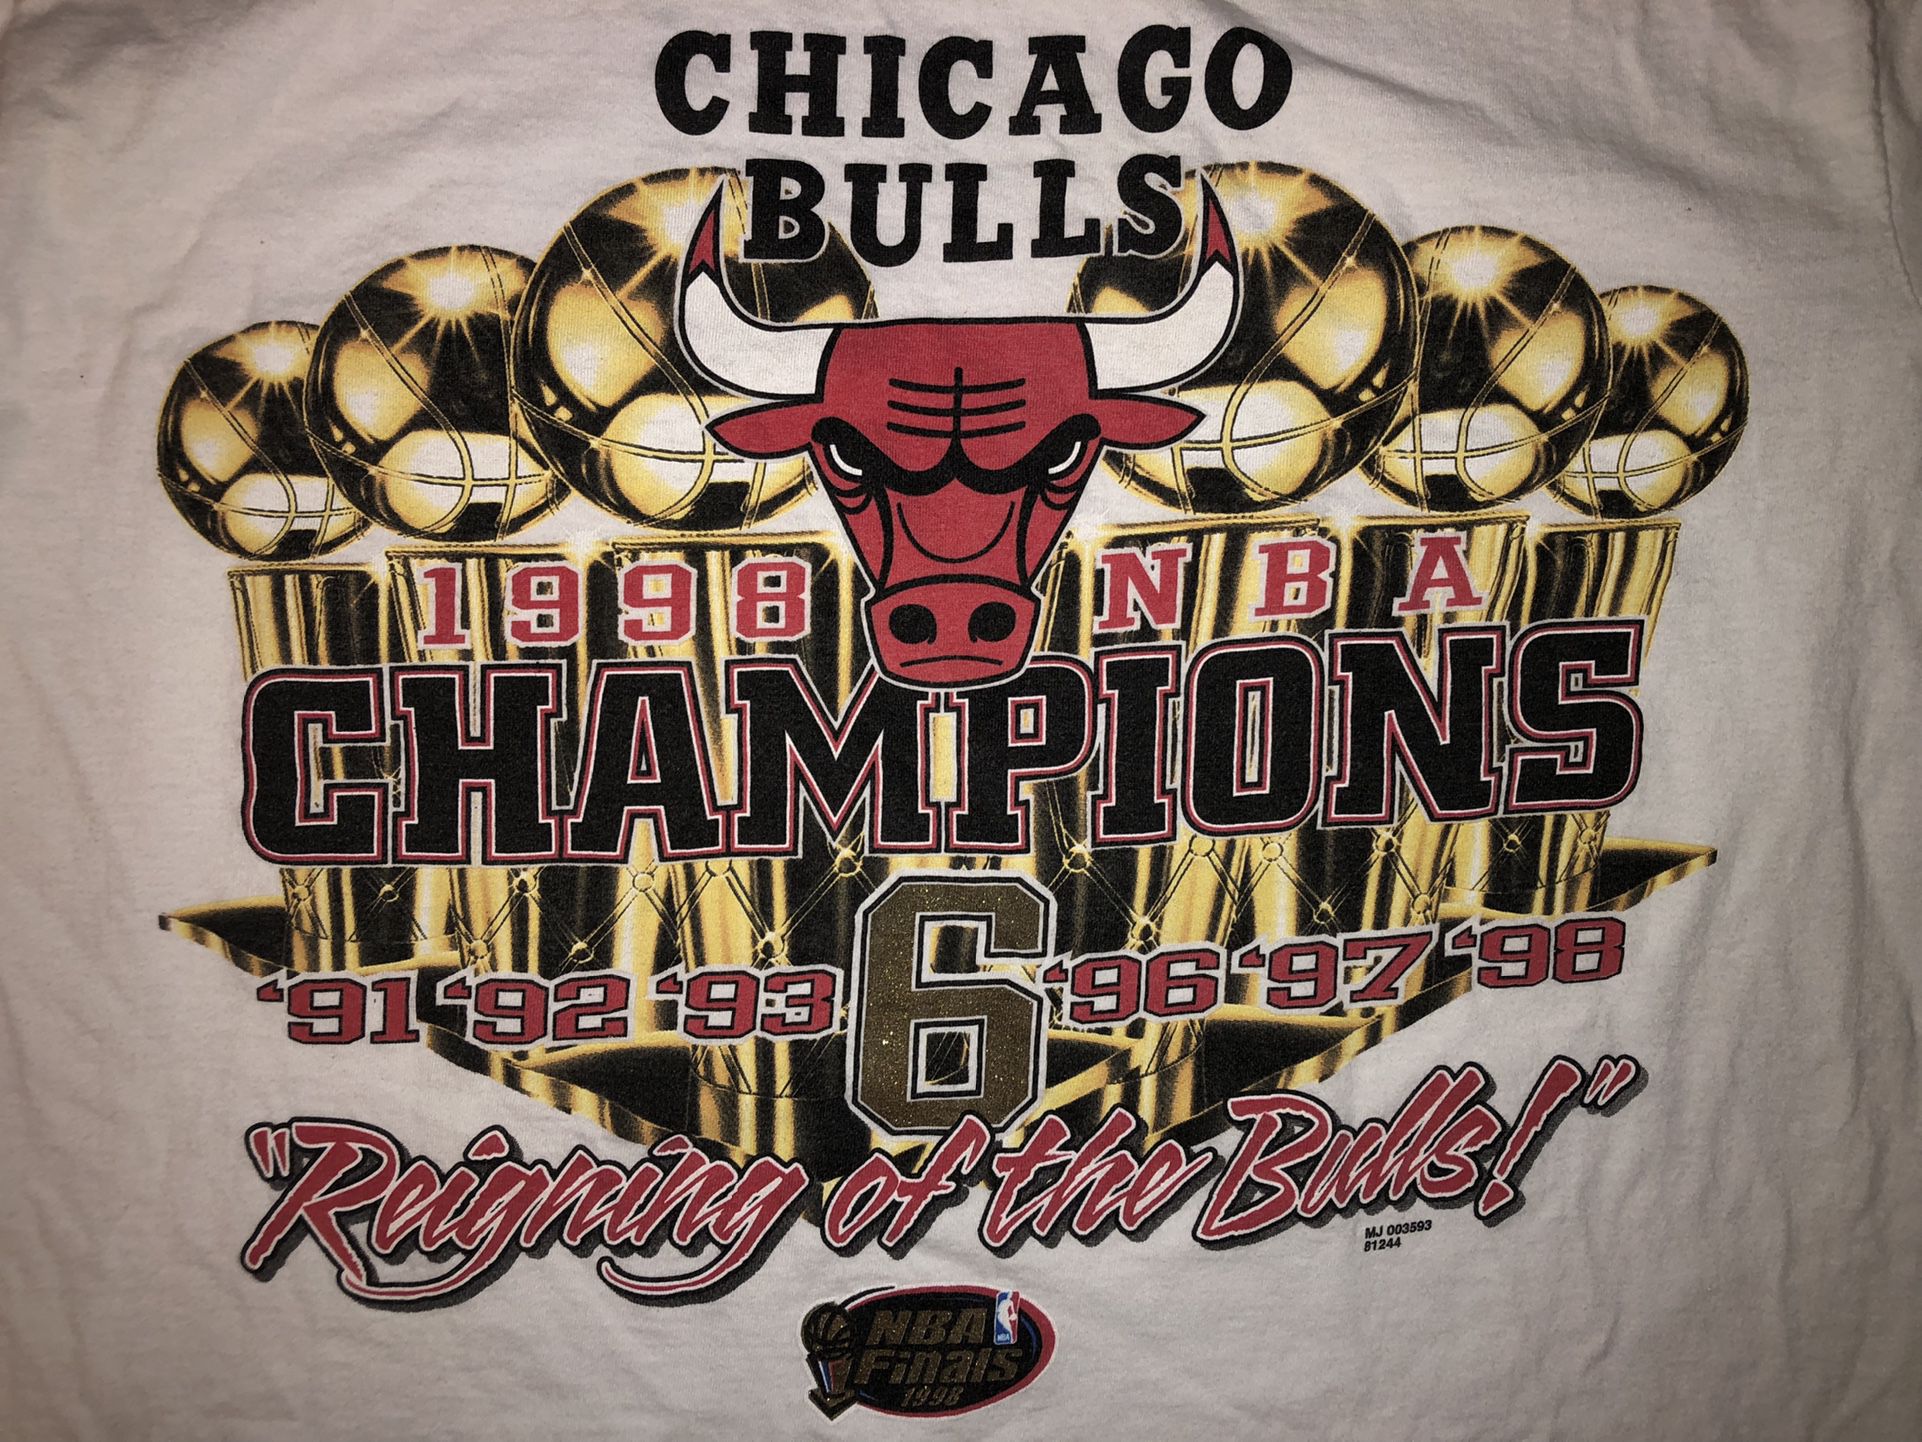 Chicago Bulls 1998 NBA Champions “Reigning of the Bulls!” Vintage T-Shirt  Sz Large for Sale in Chicago, IL - OfferUp